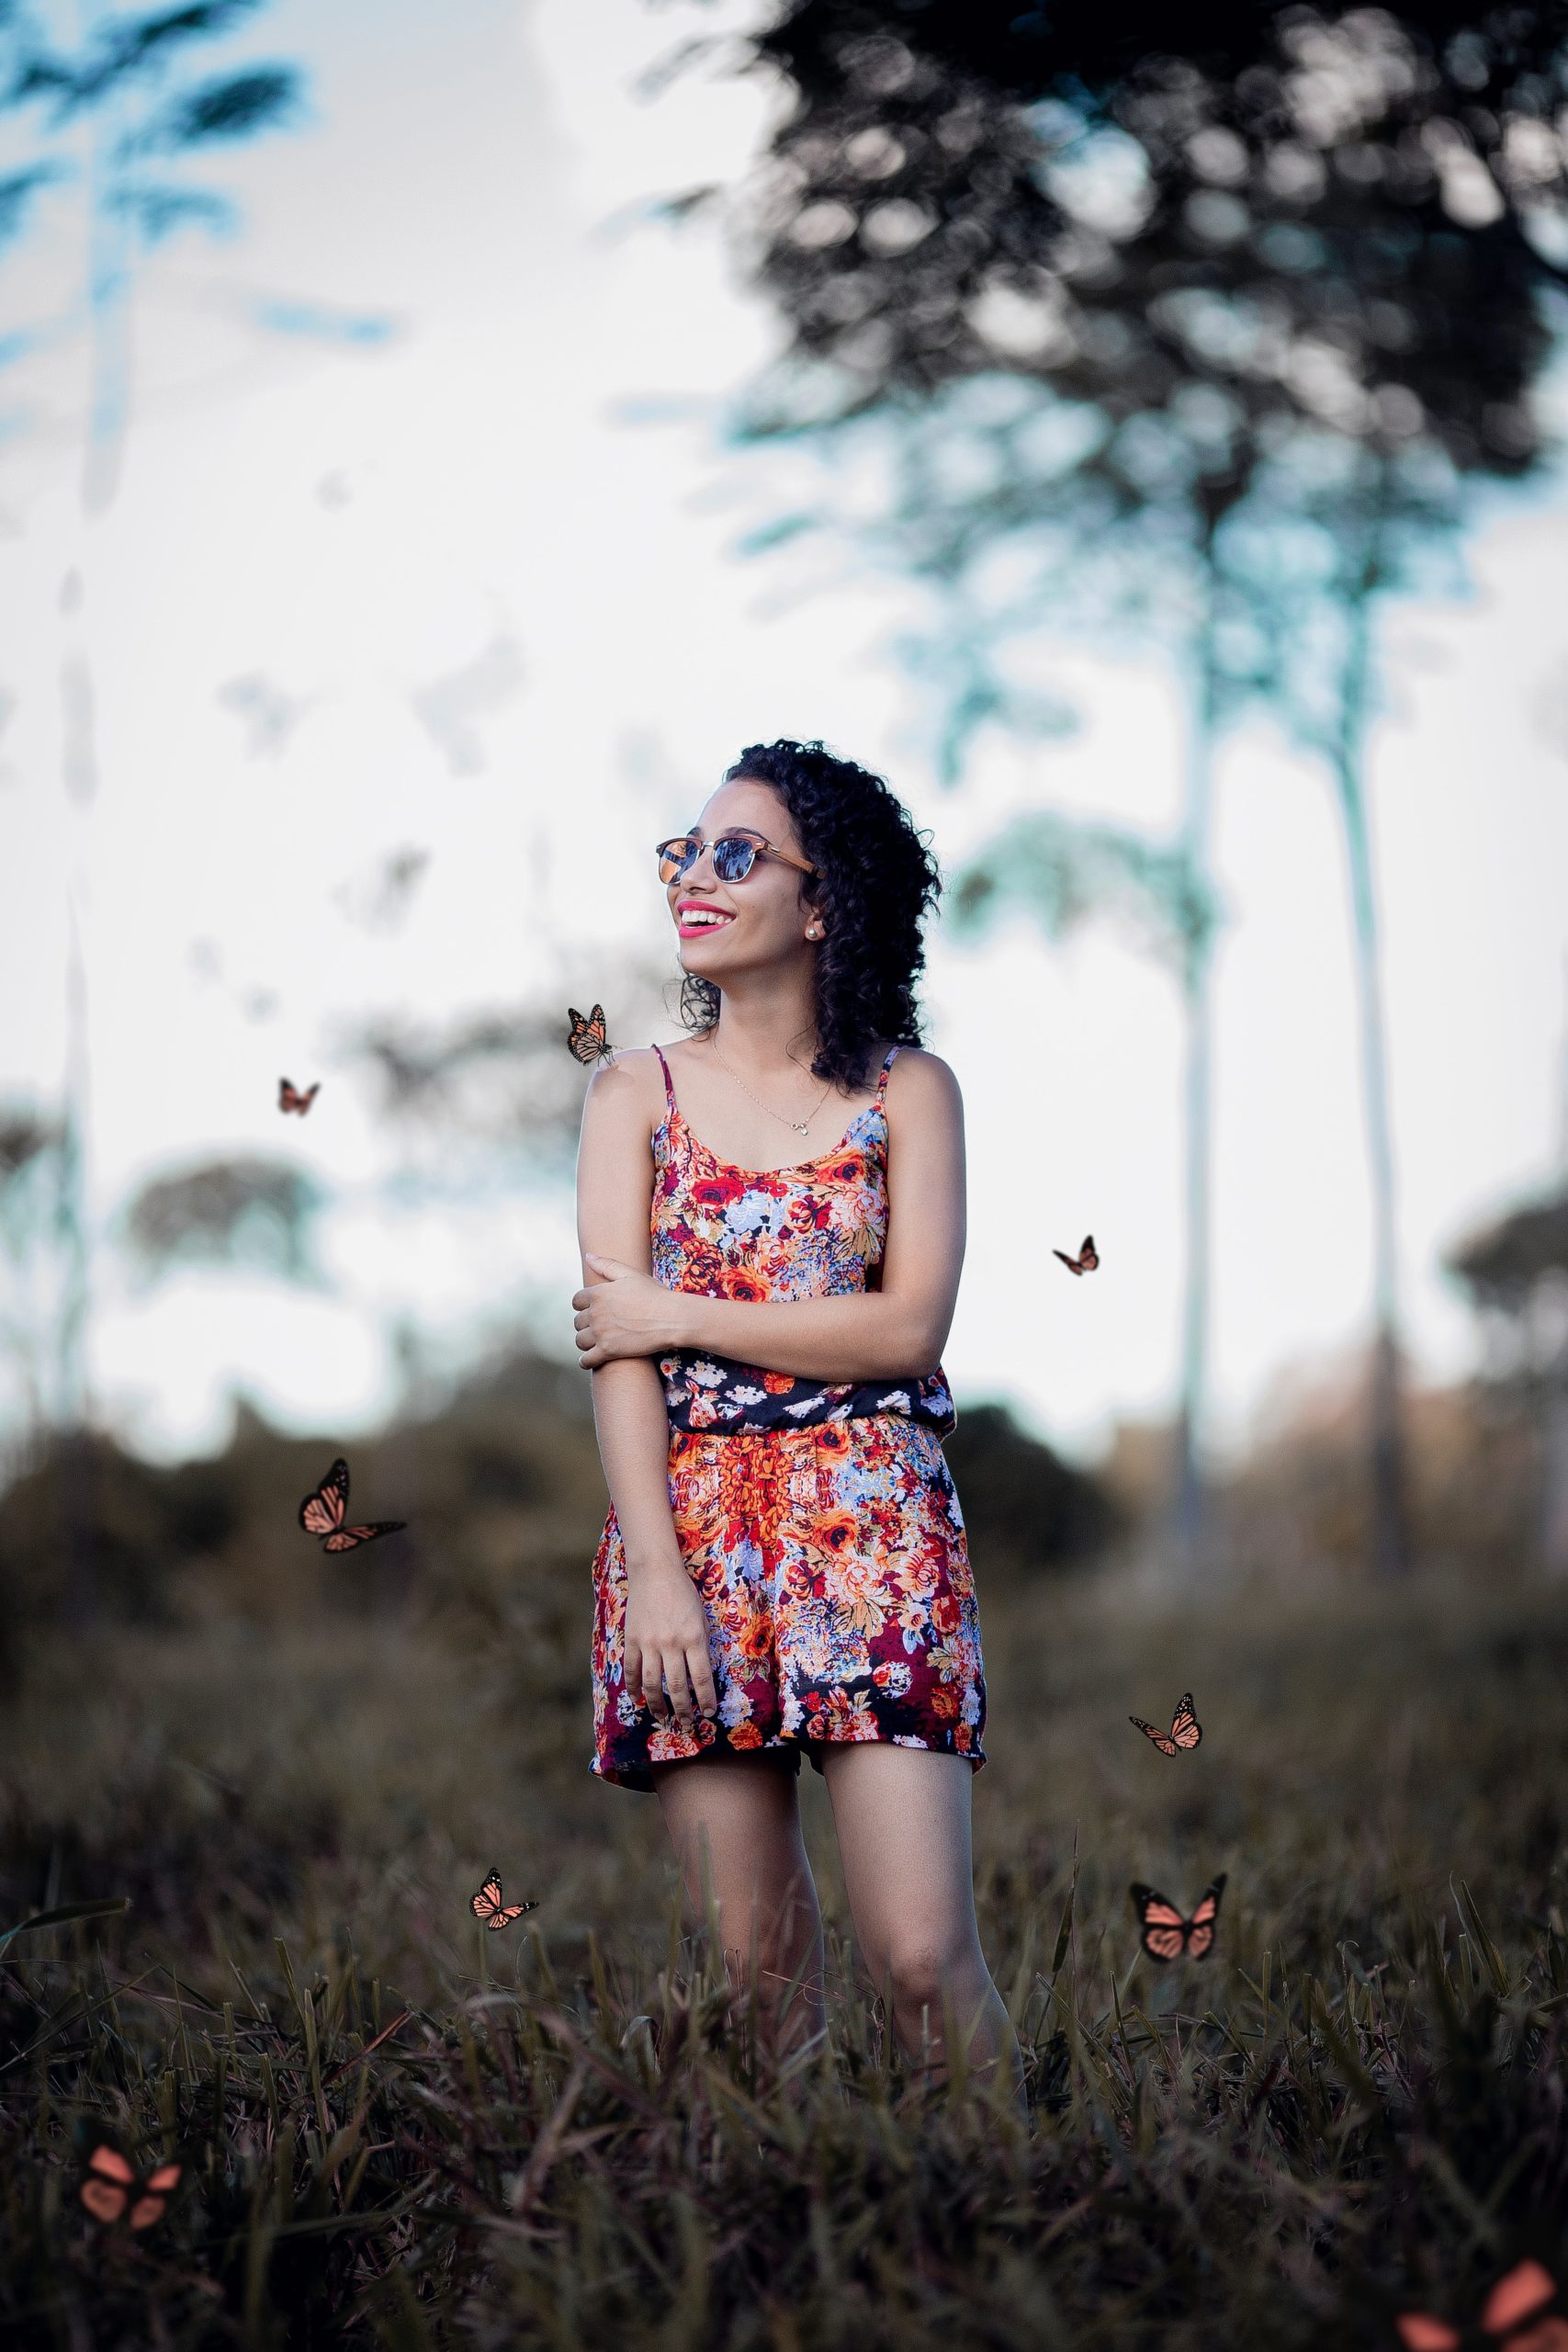 A woman wearing sunglasses and a short dress is standing in a field and she is smiling as butterflies are flying around her.